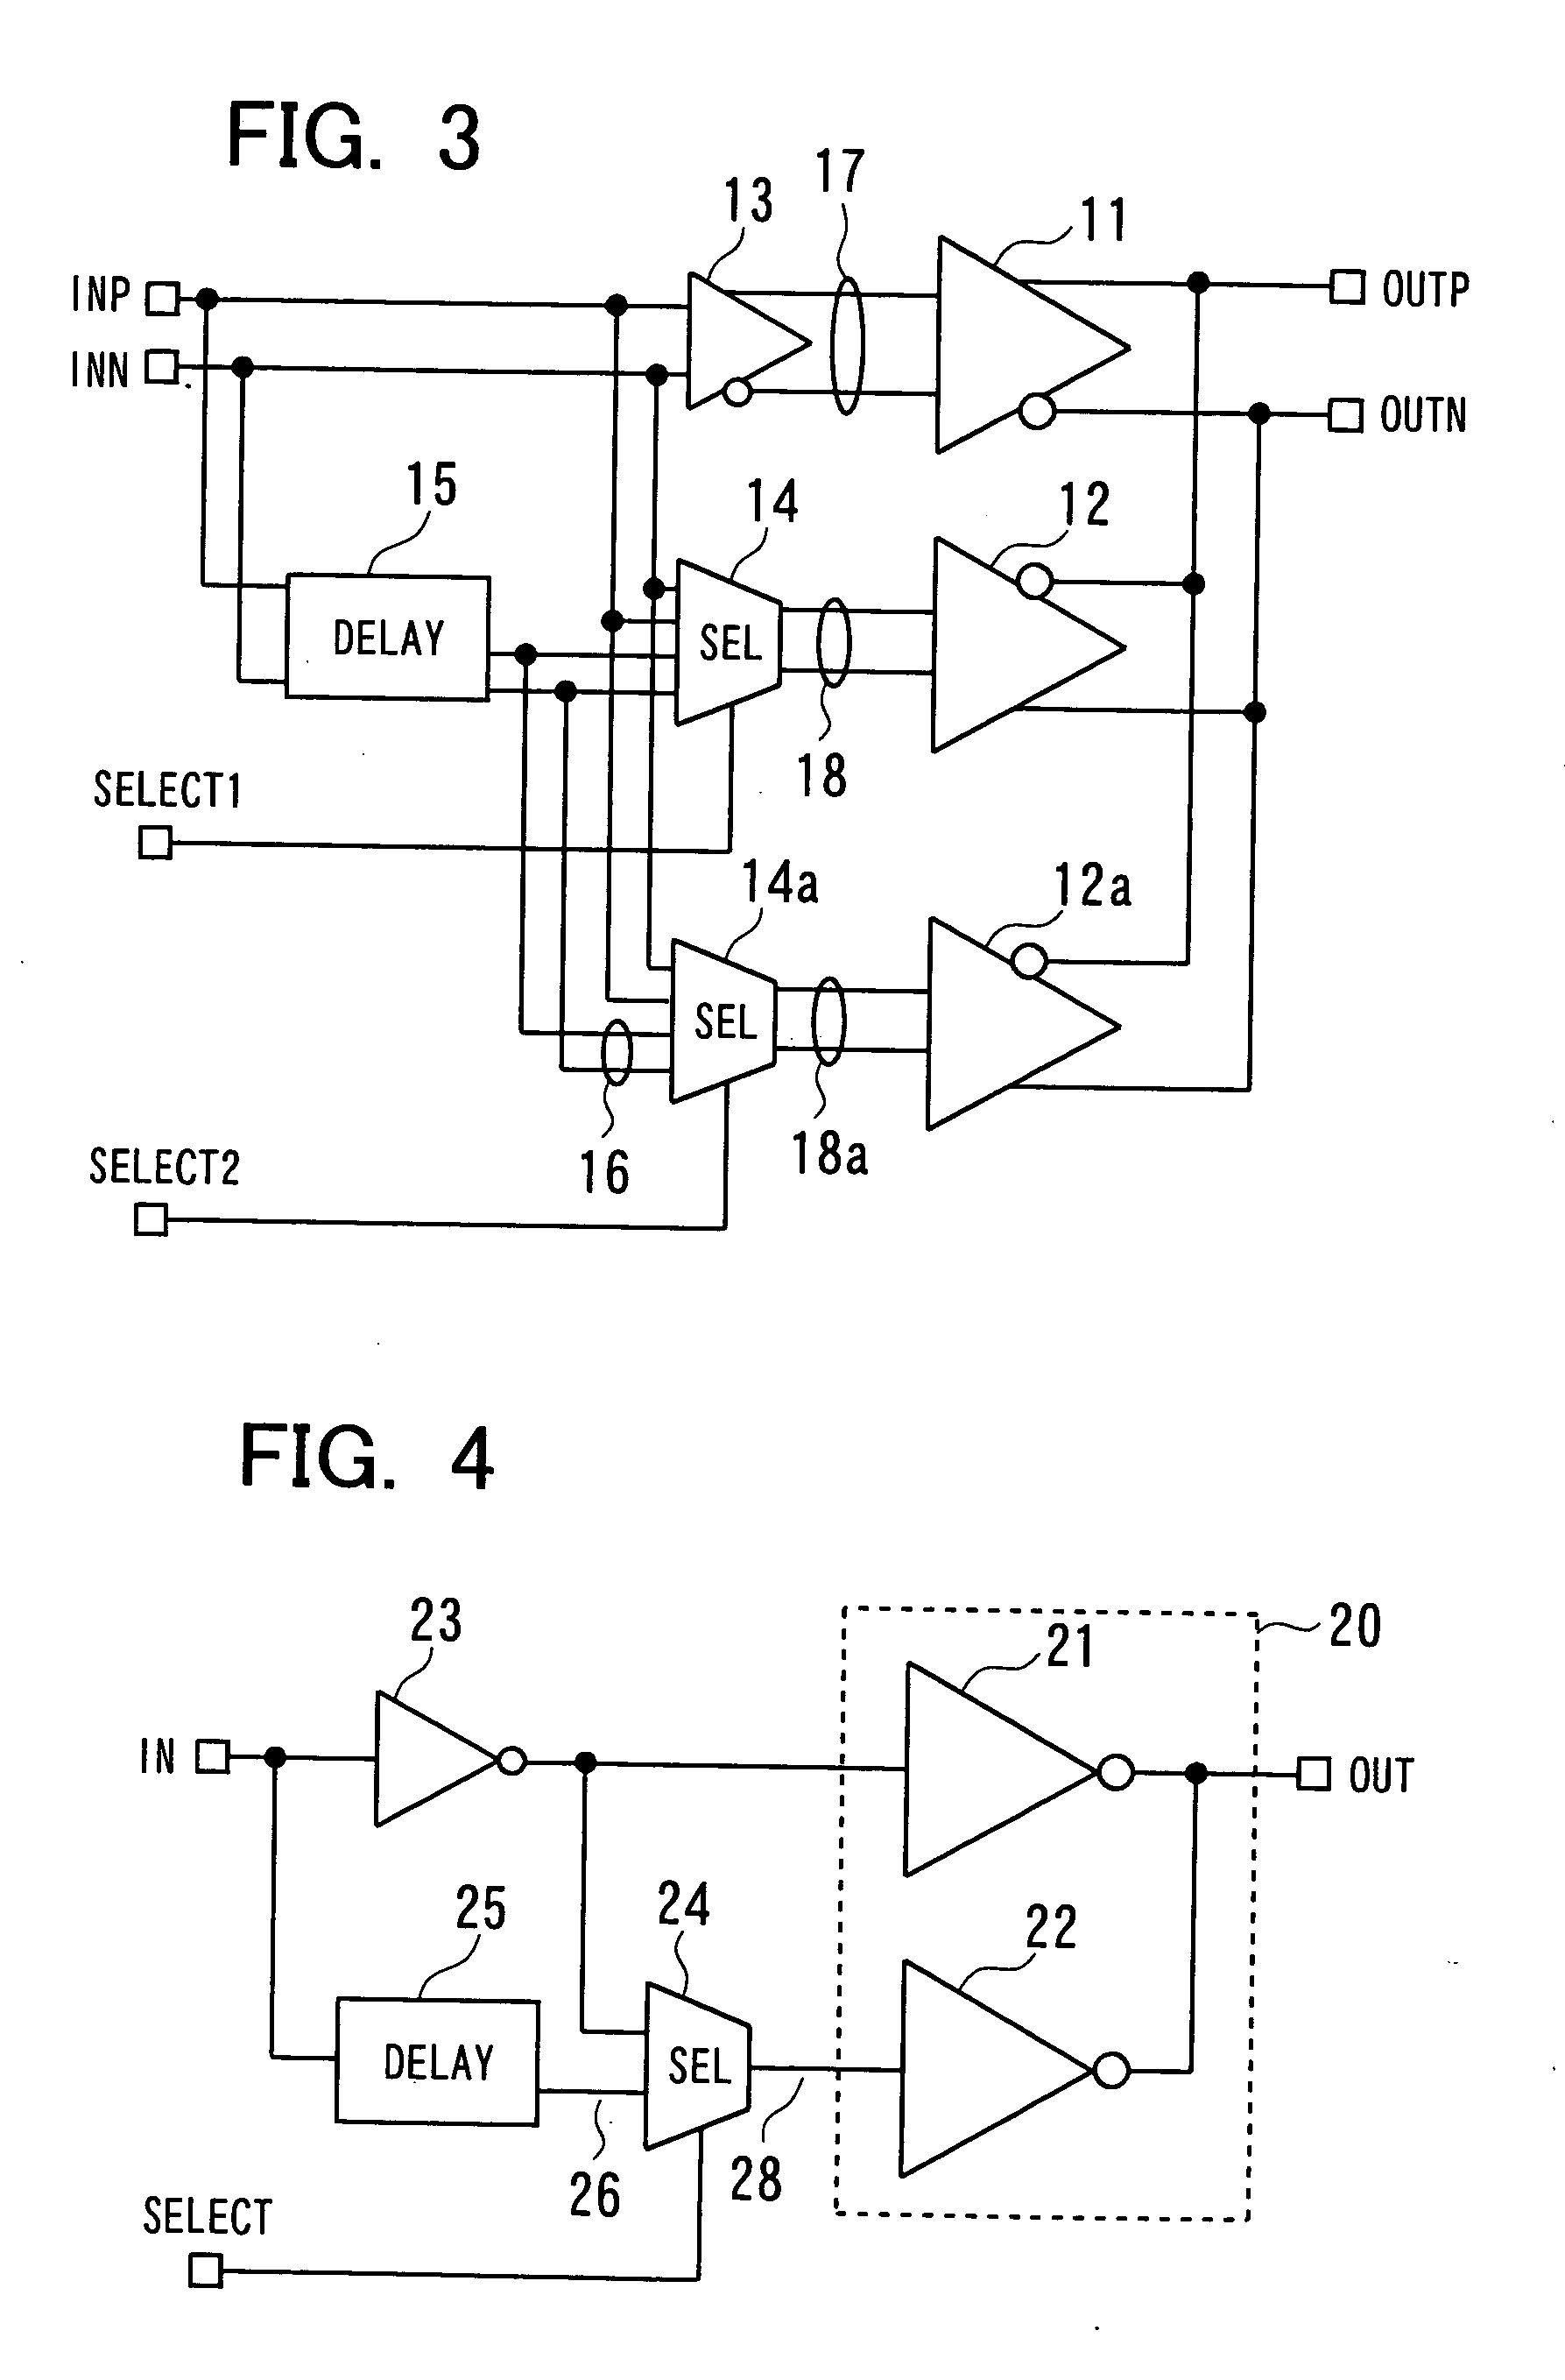 Output buffer circuit with de-emphasis function